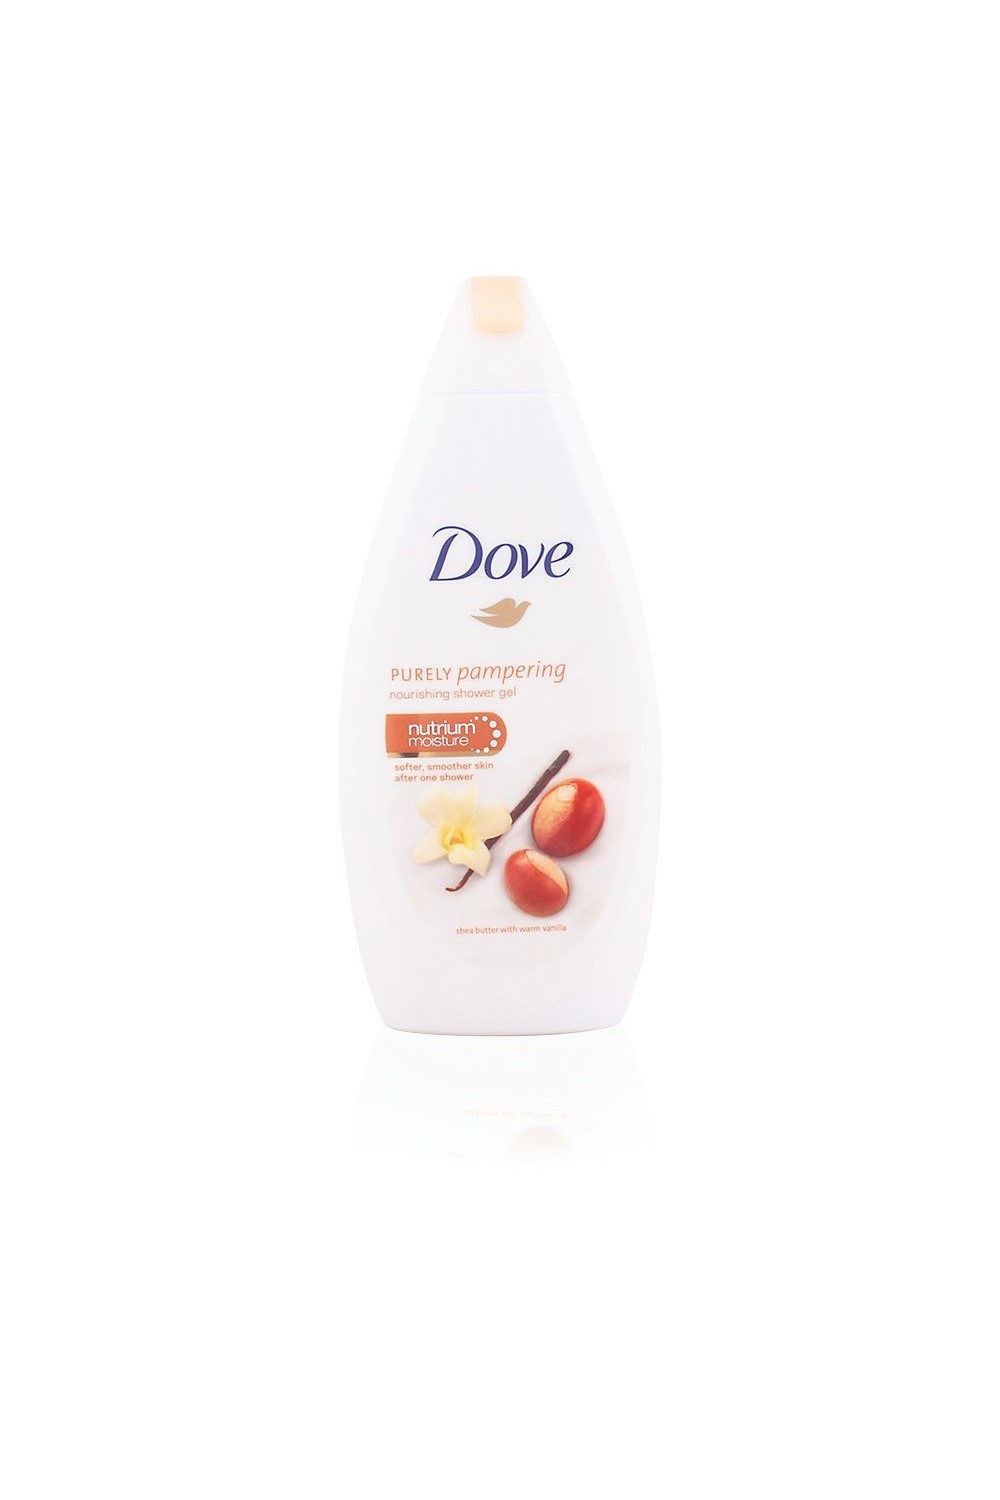 Dove Purely Pampering Shea Butter With Warm Vanilla Shower Gel 500ml